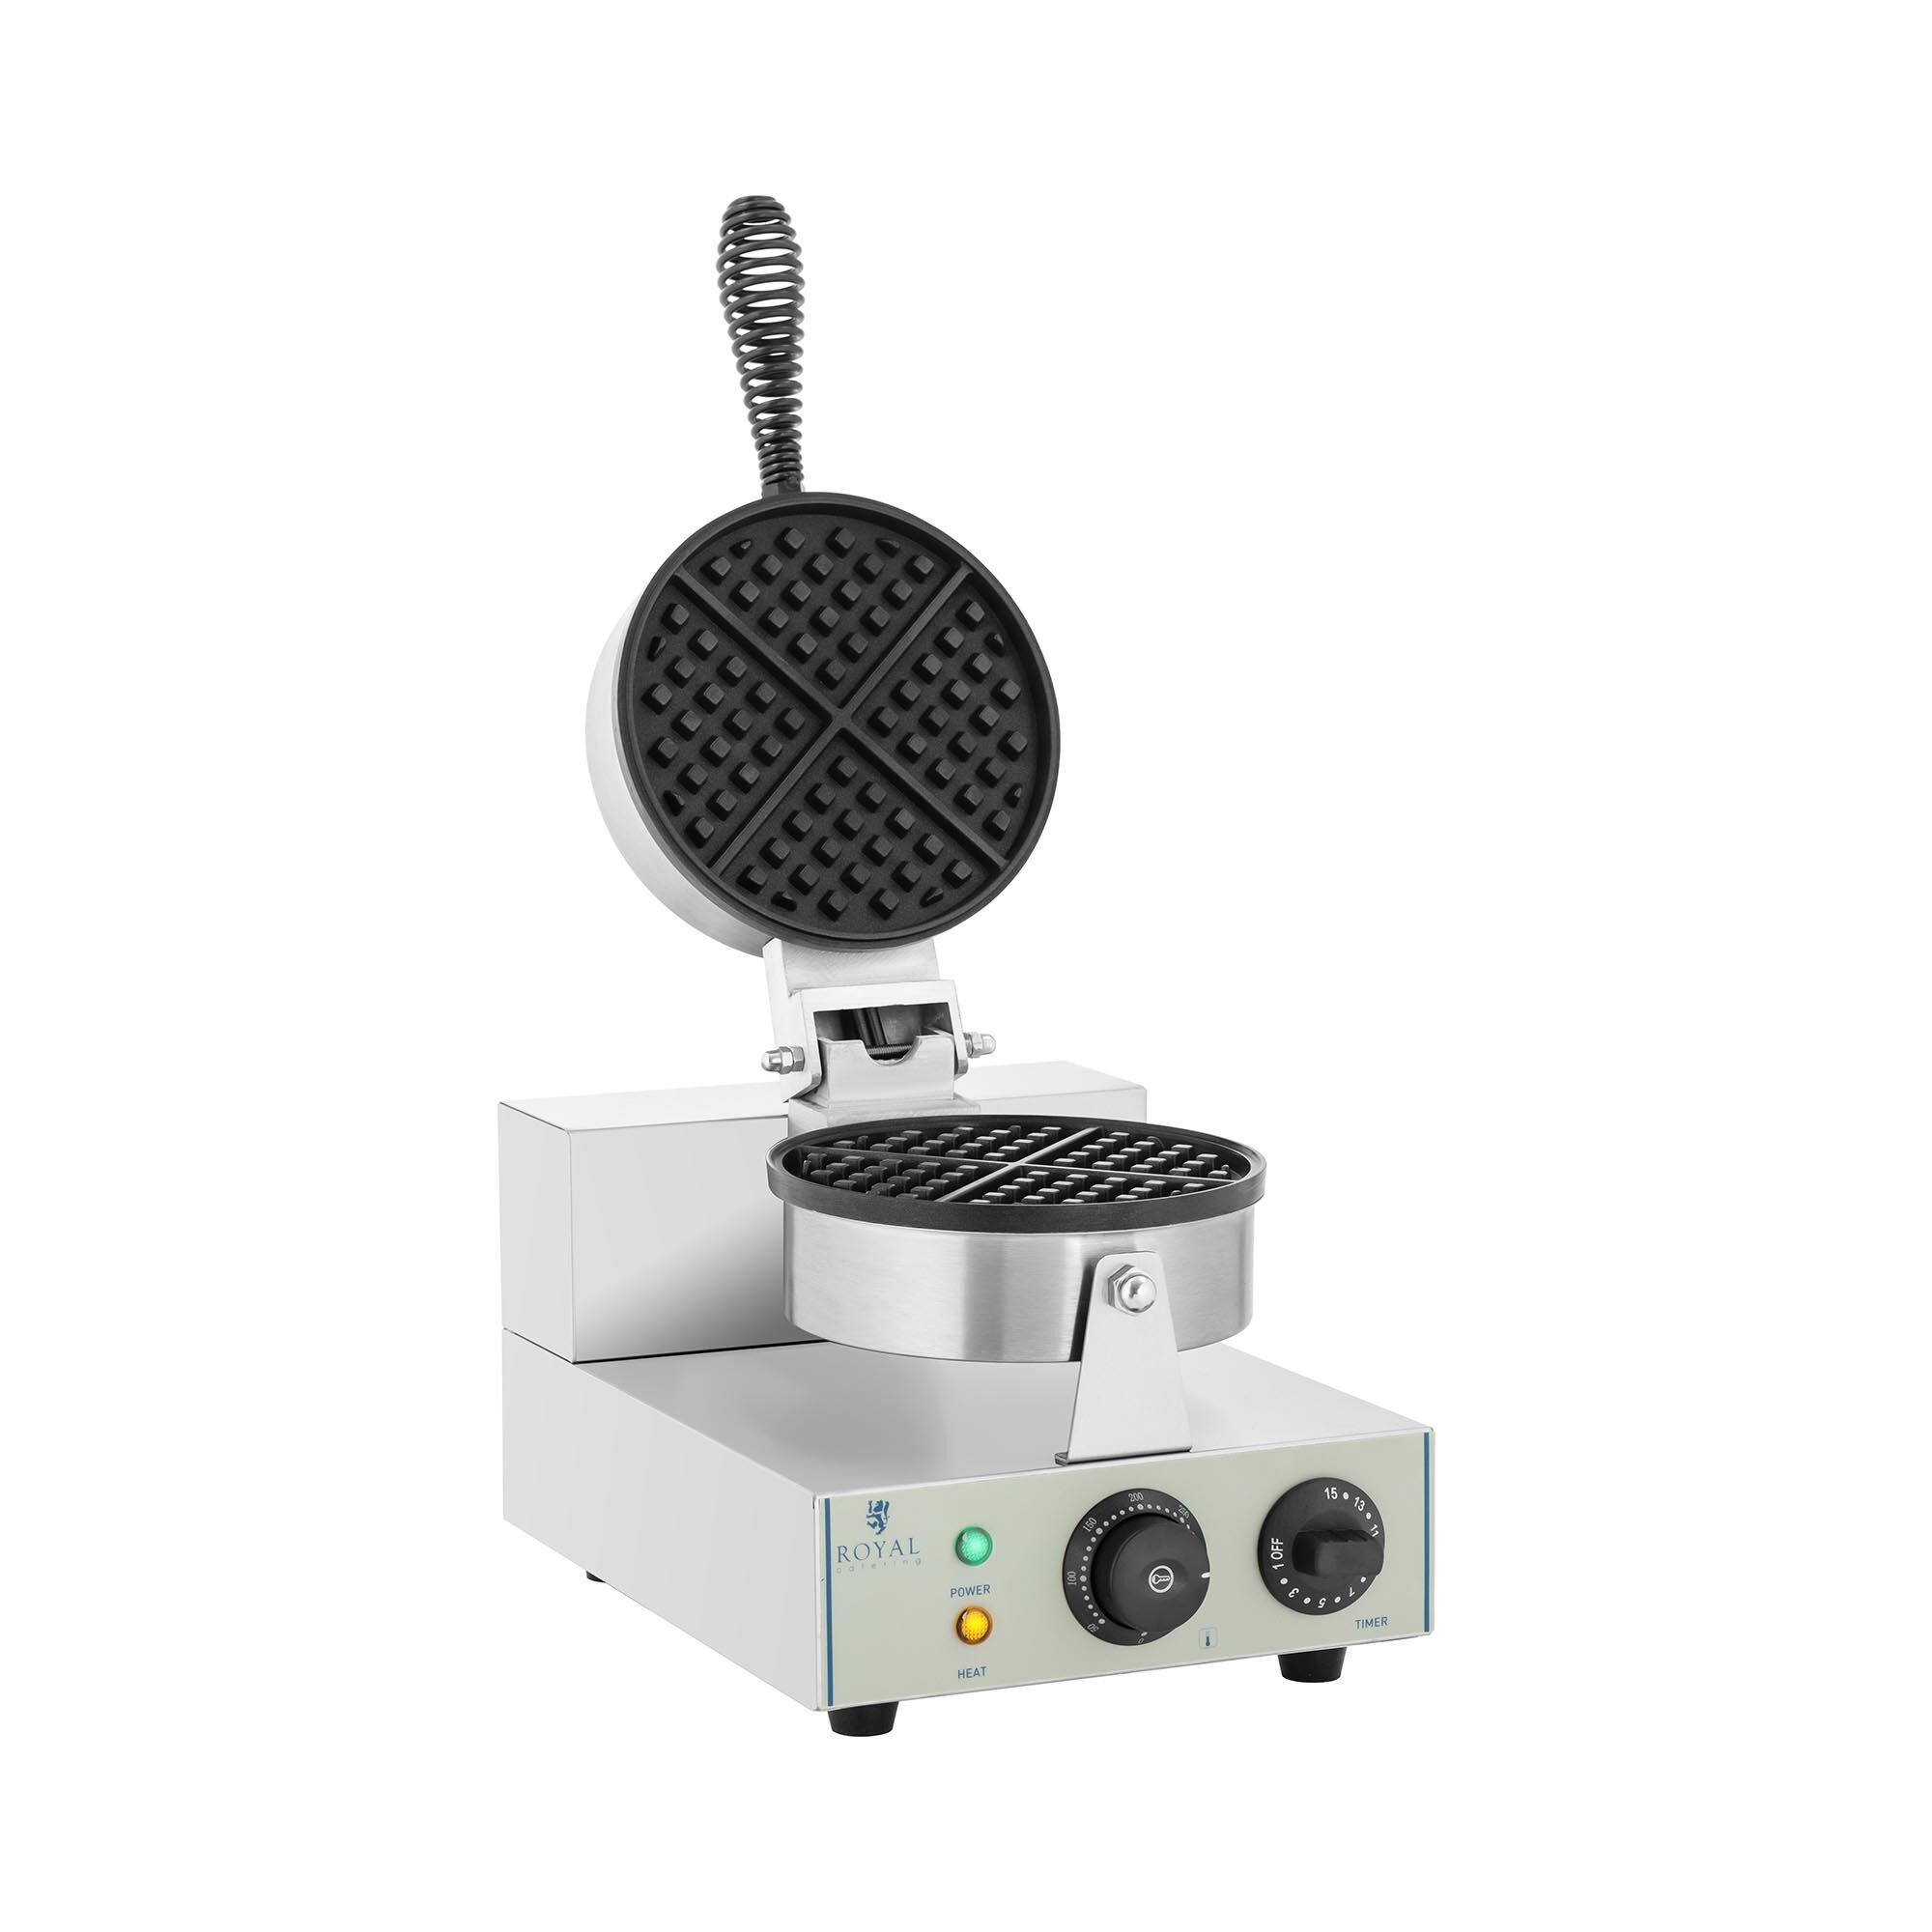 Royal Catering Waffle Maker - 1300 Watts - Round RCWM-1300-R